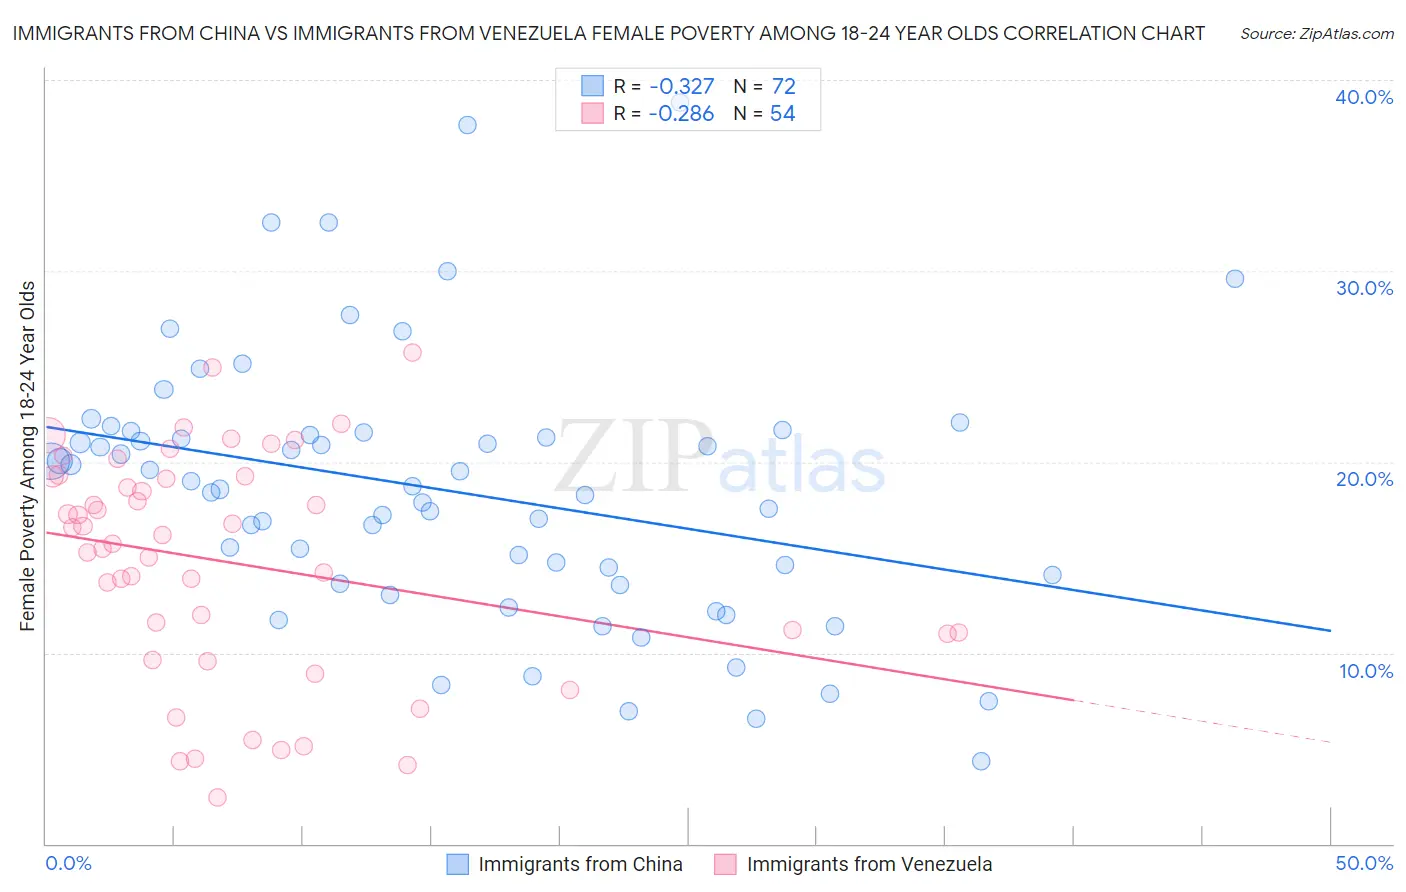 Immigrants from China vs Immigrants from Venezuela Female Poverty Among 18-24 Year Olds